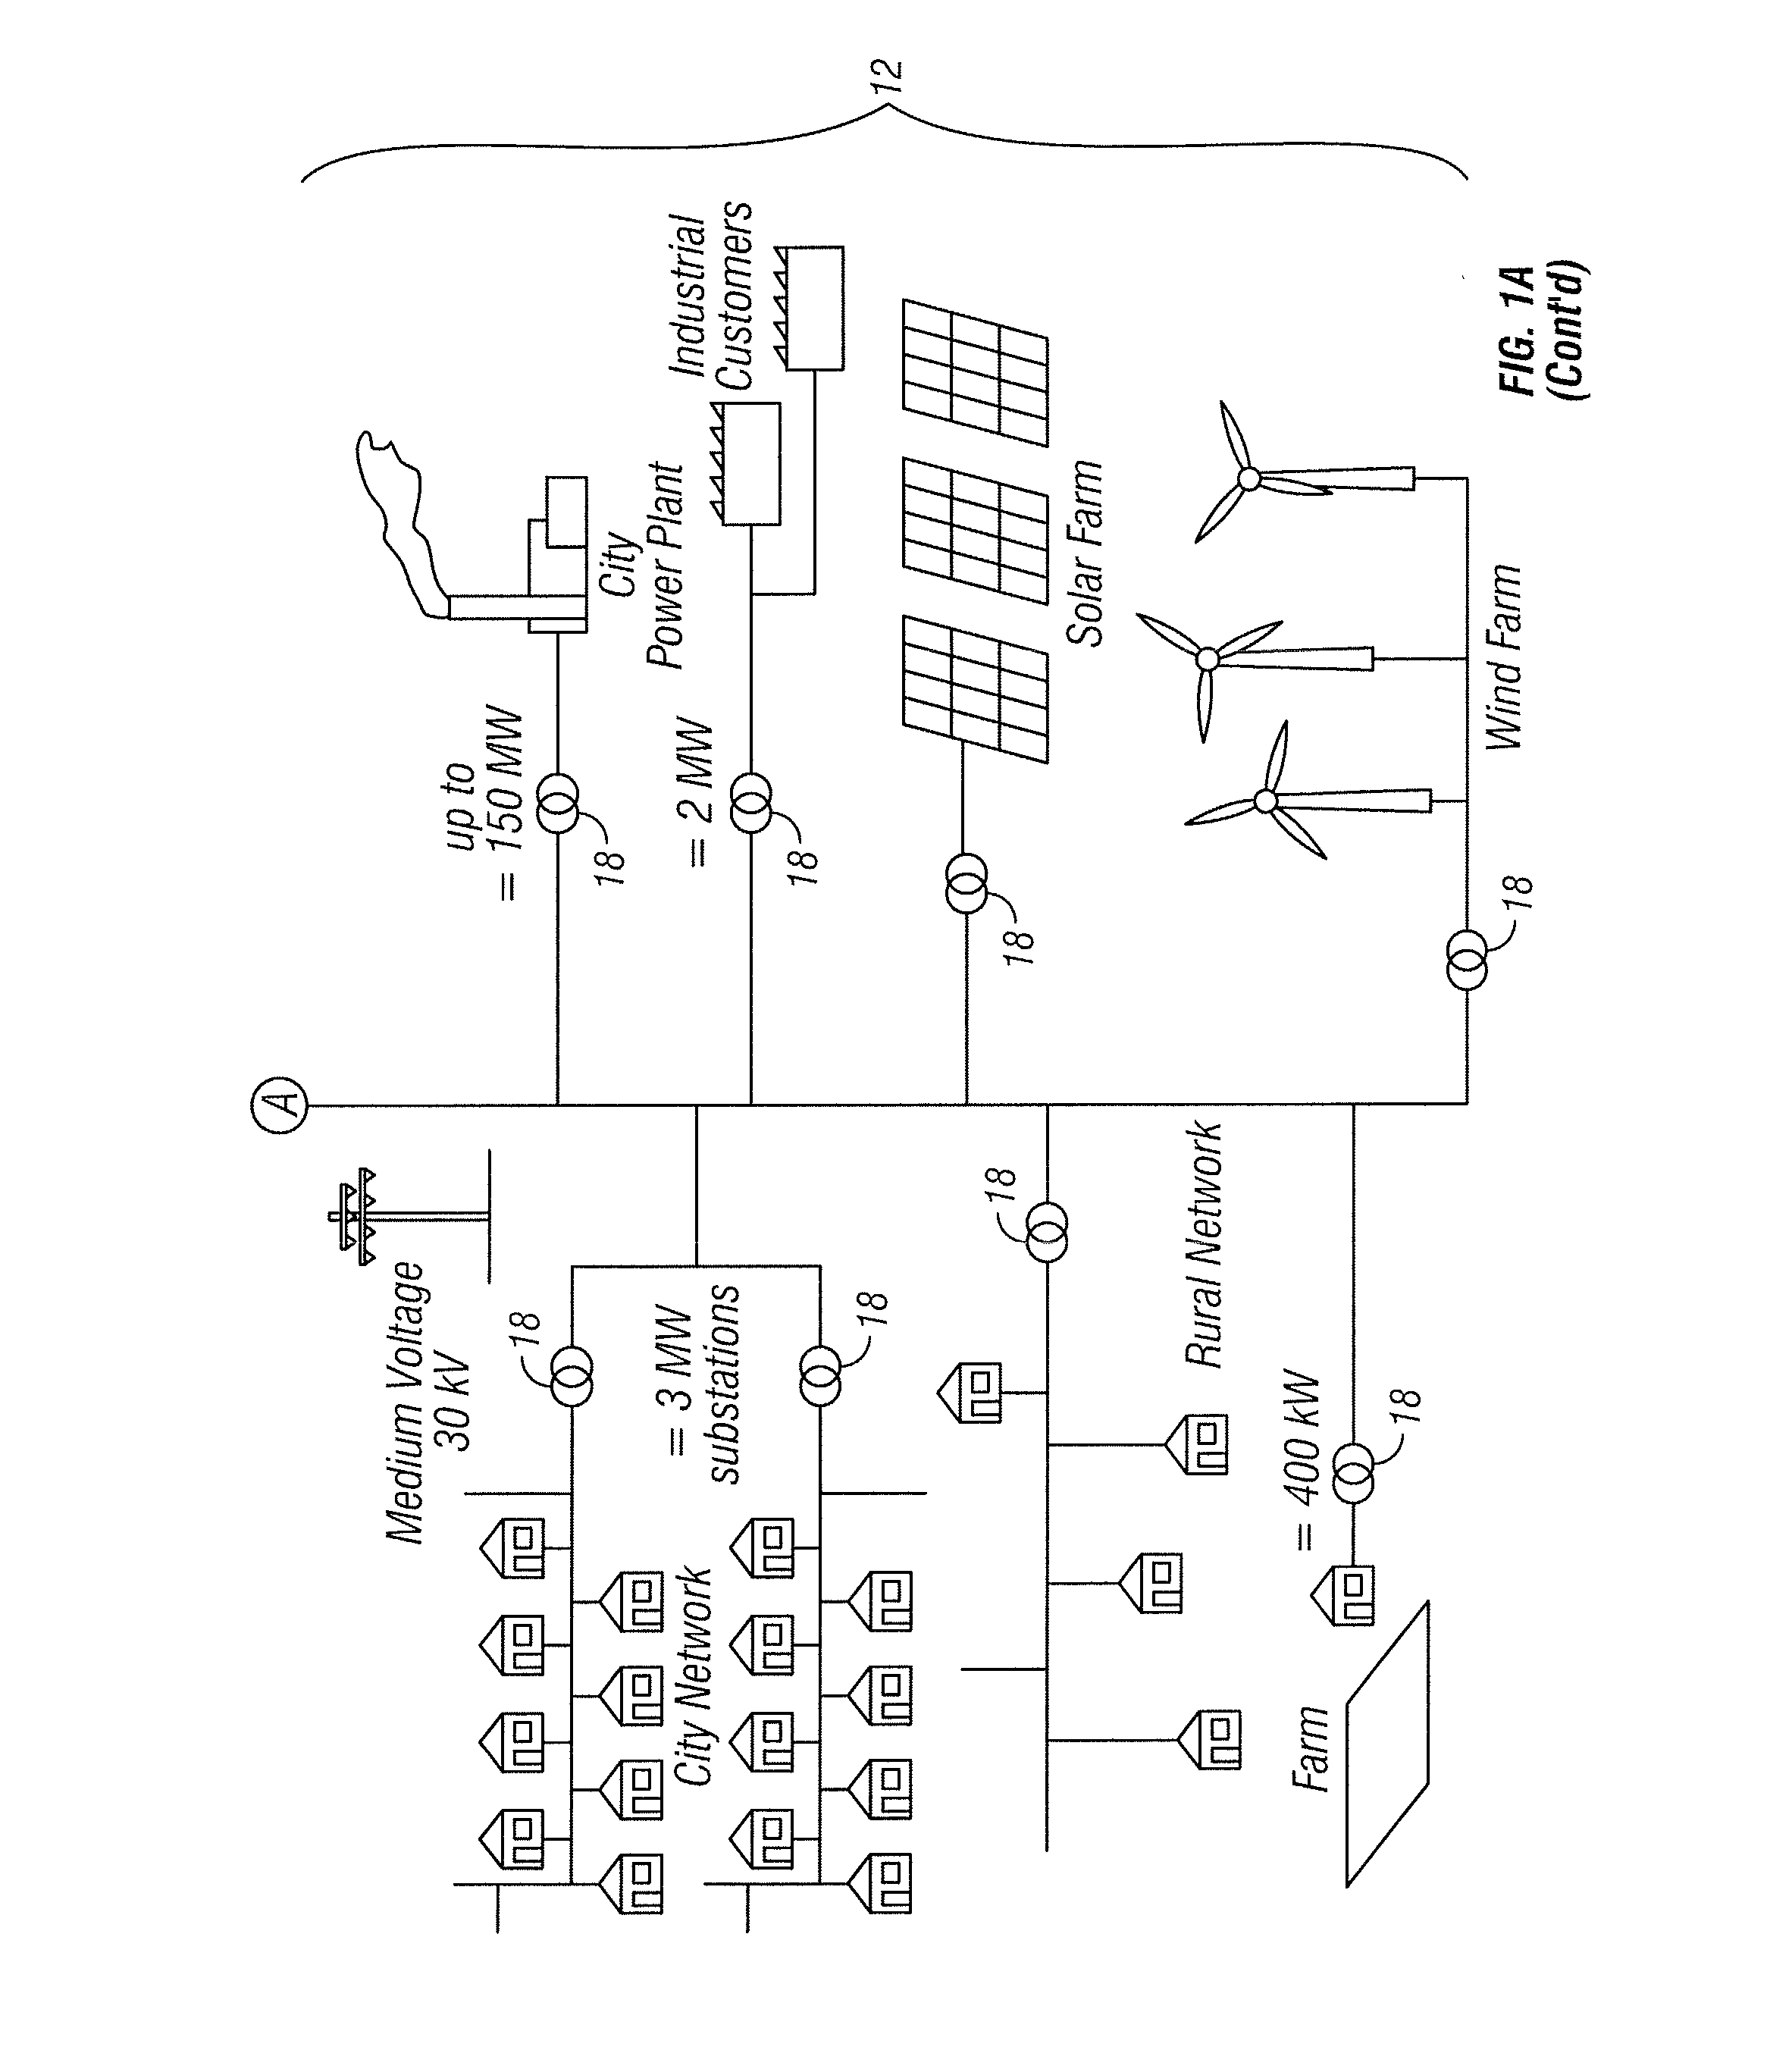 Surge suppression system for medium and high voltage